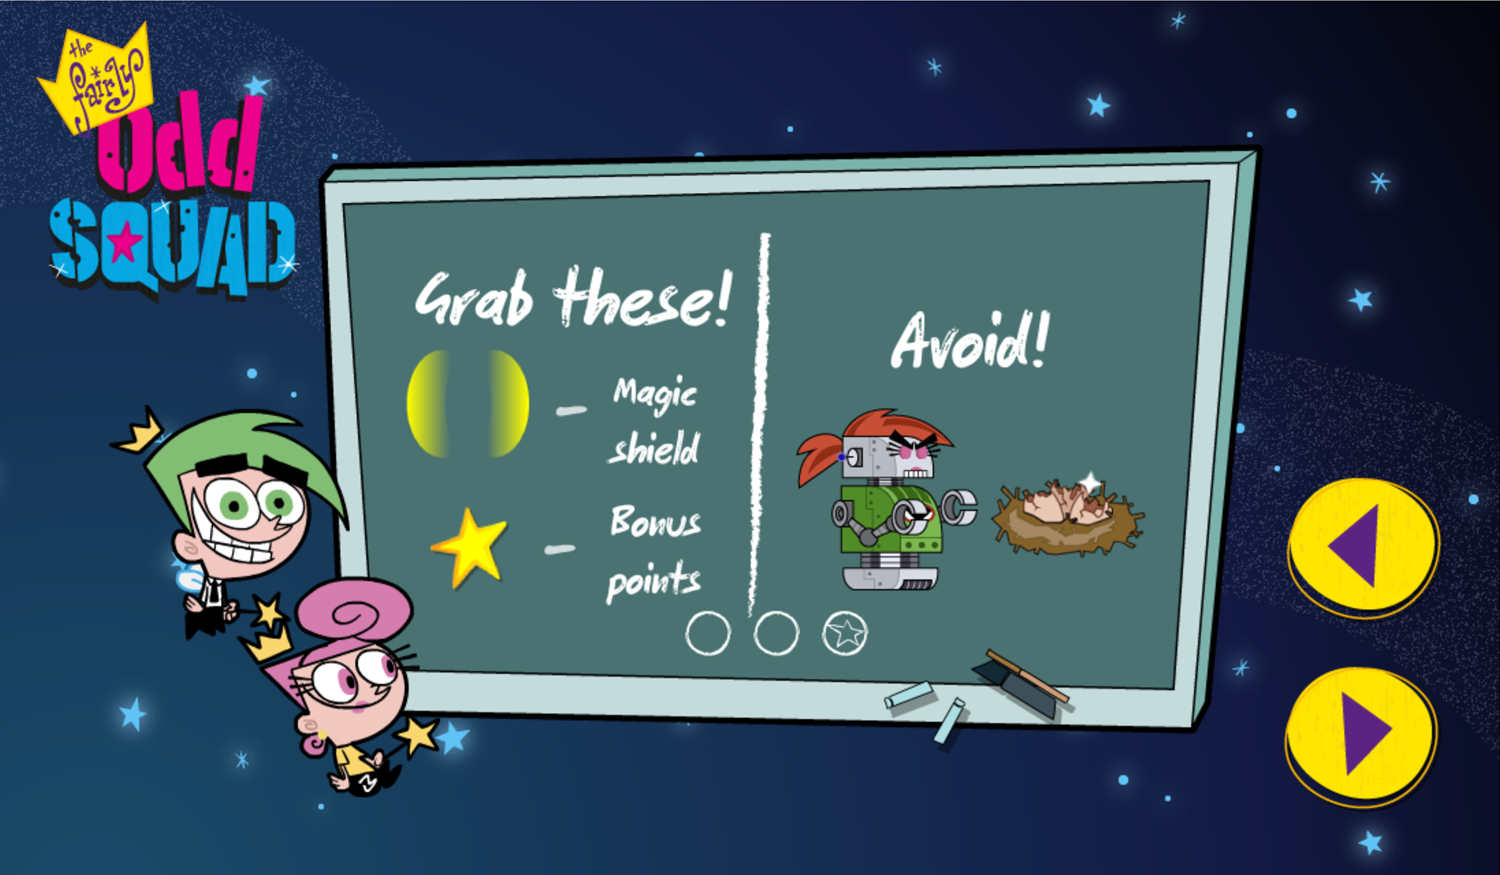 The Fairly OddParents The Fairly odd Squad Game Collect & Avoid Instructions Screen Screenshot.